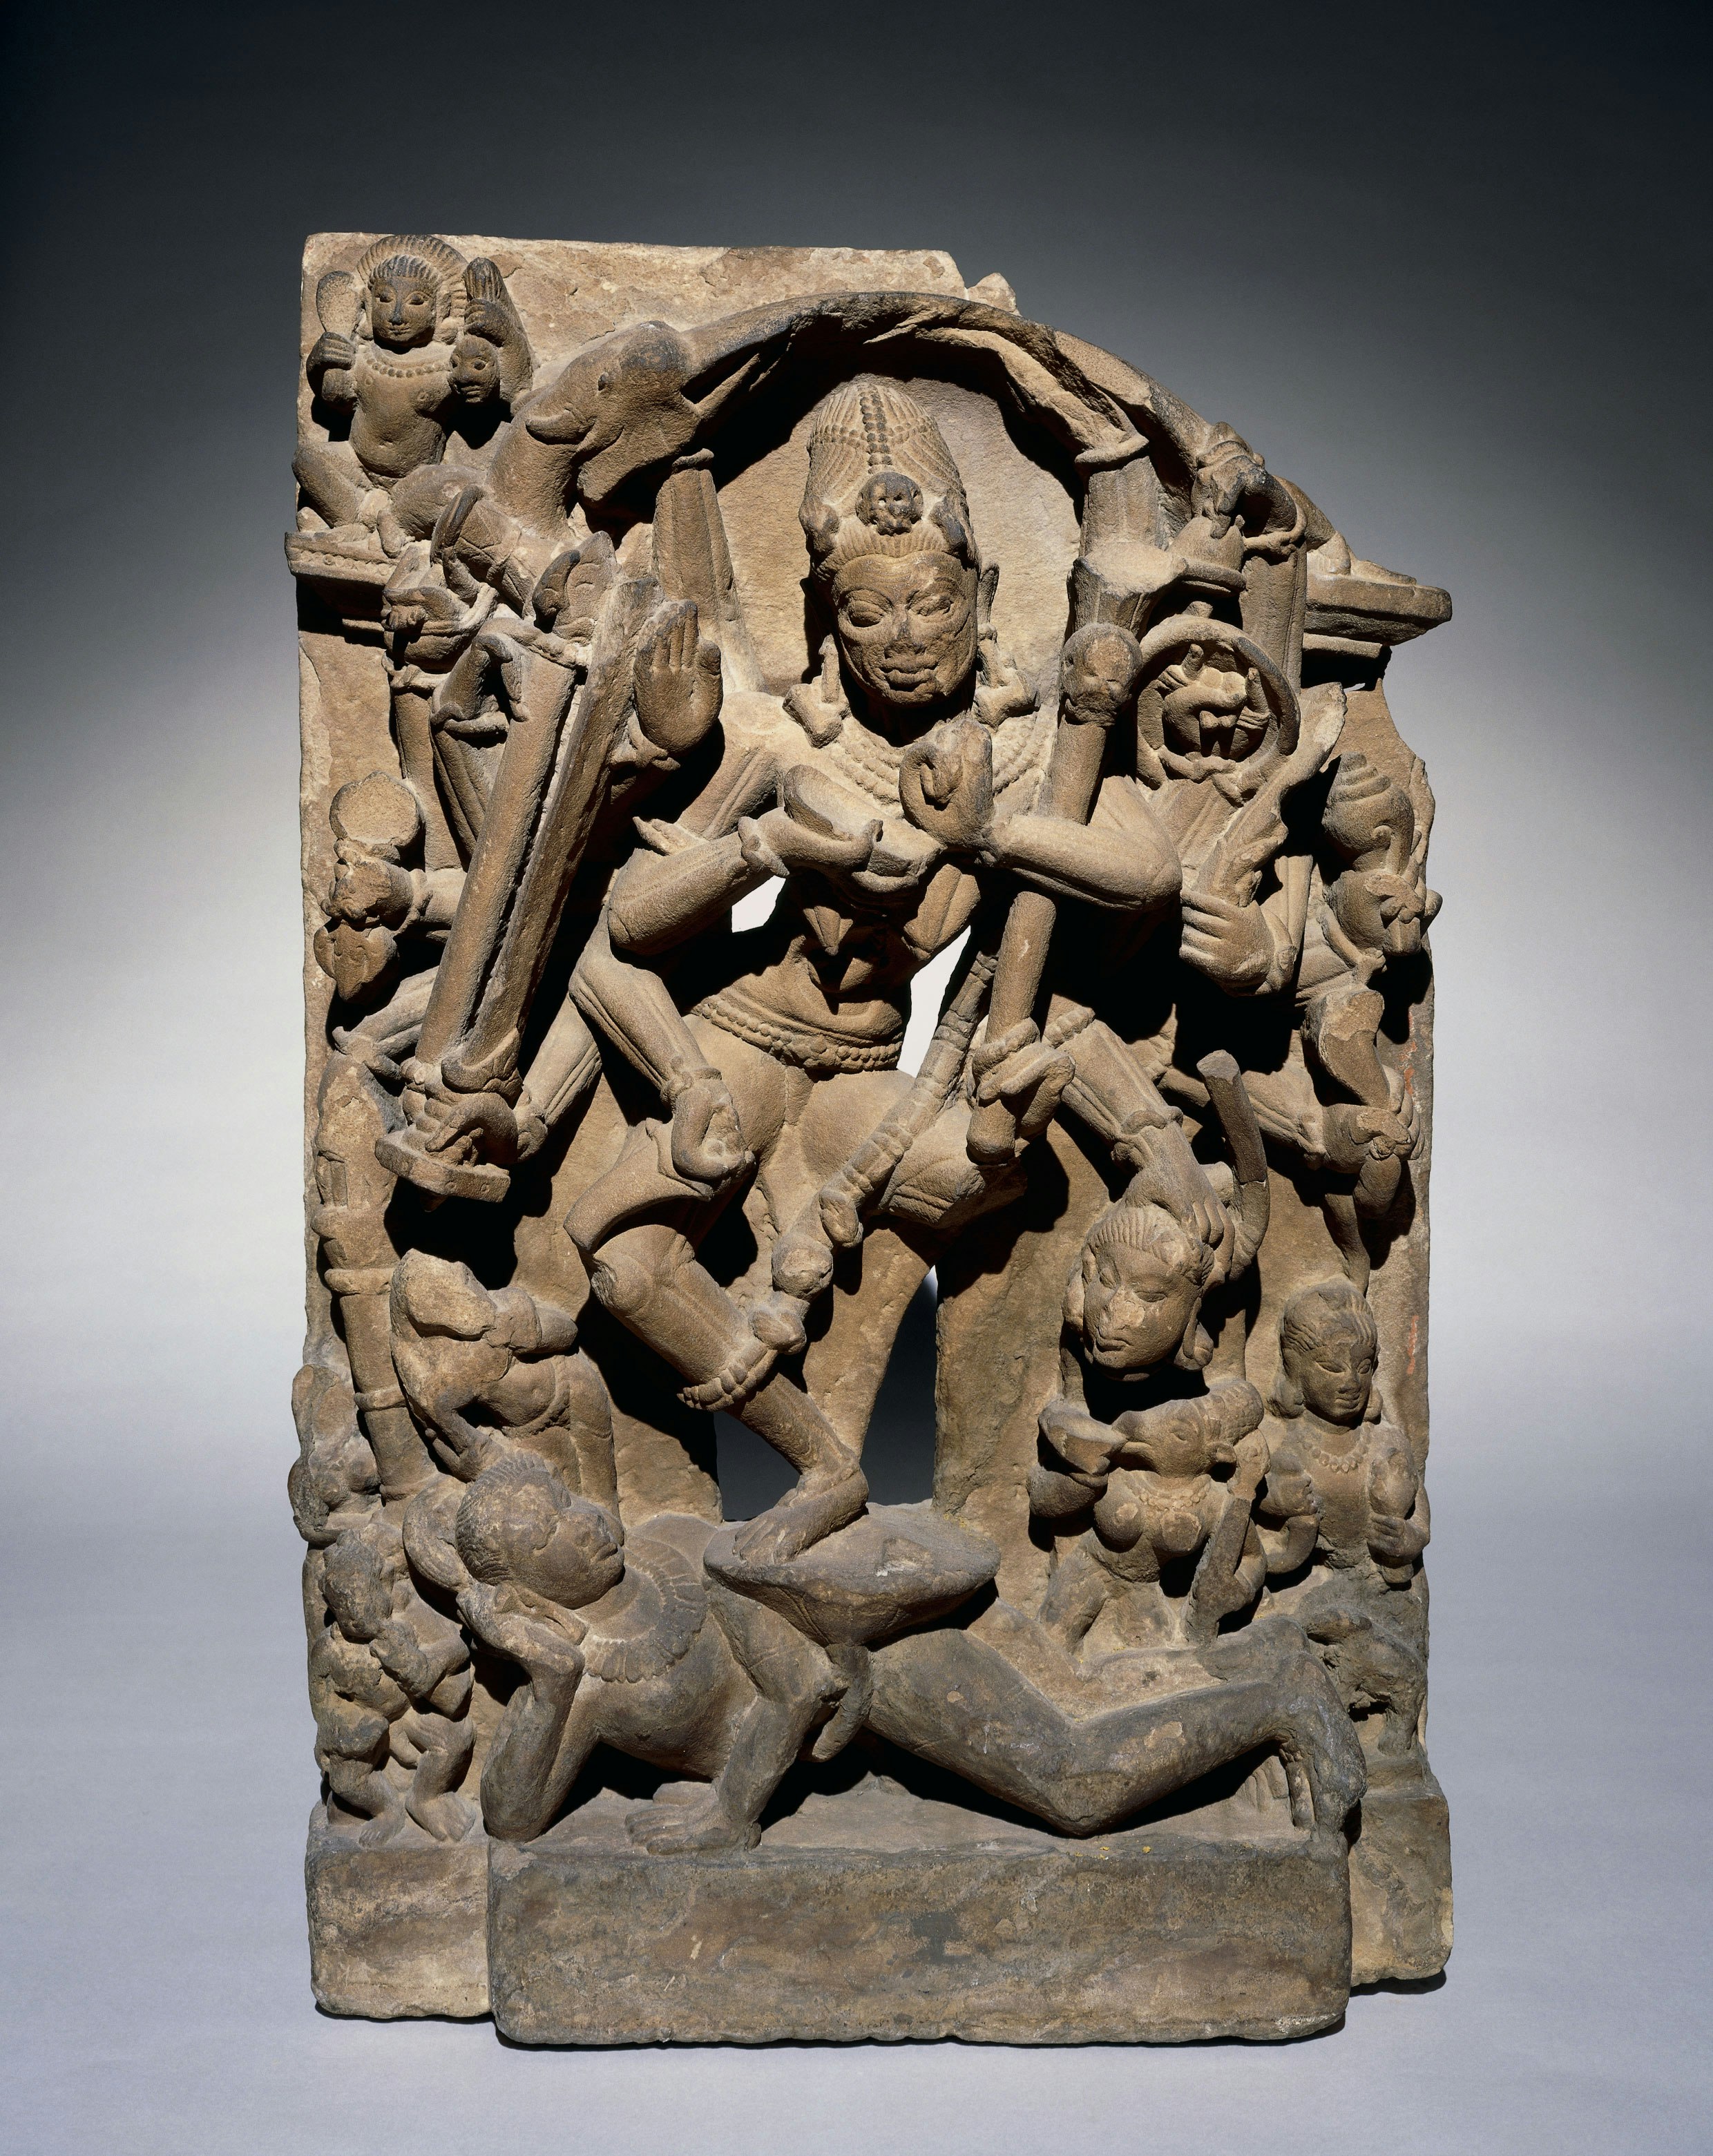 Chamunda dancing on a corpse, Madhya Pradesh, Central India, 800s. ©The Trustees of the British Museum.